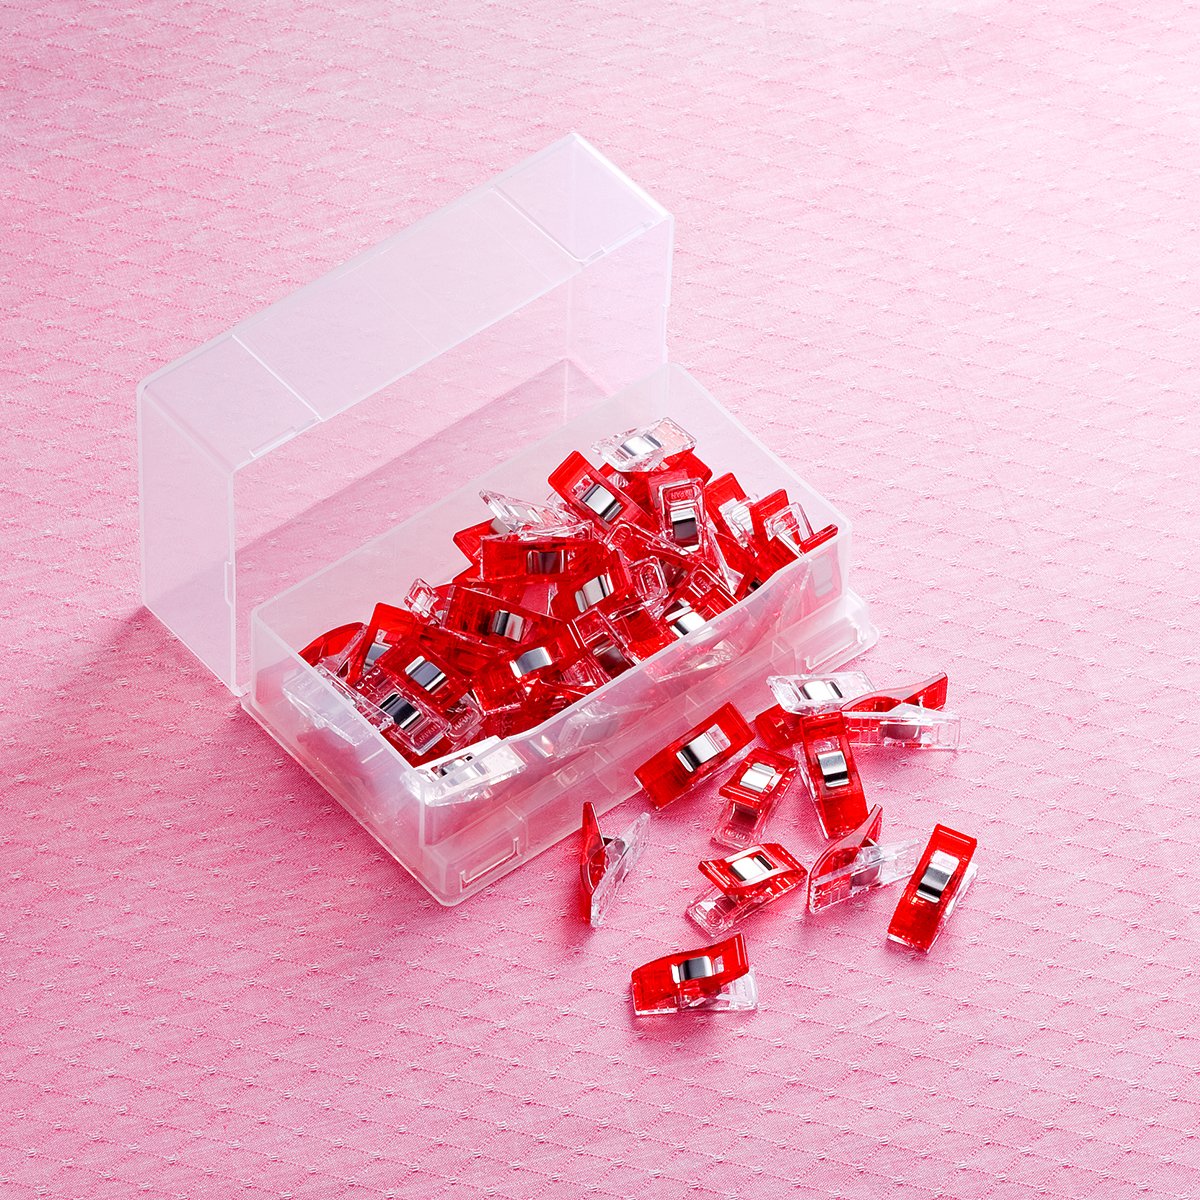 Clover Wonder Clips - 1 X 3/8 - 50/Pack - Red/Silver